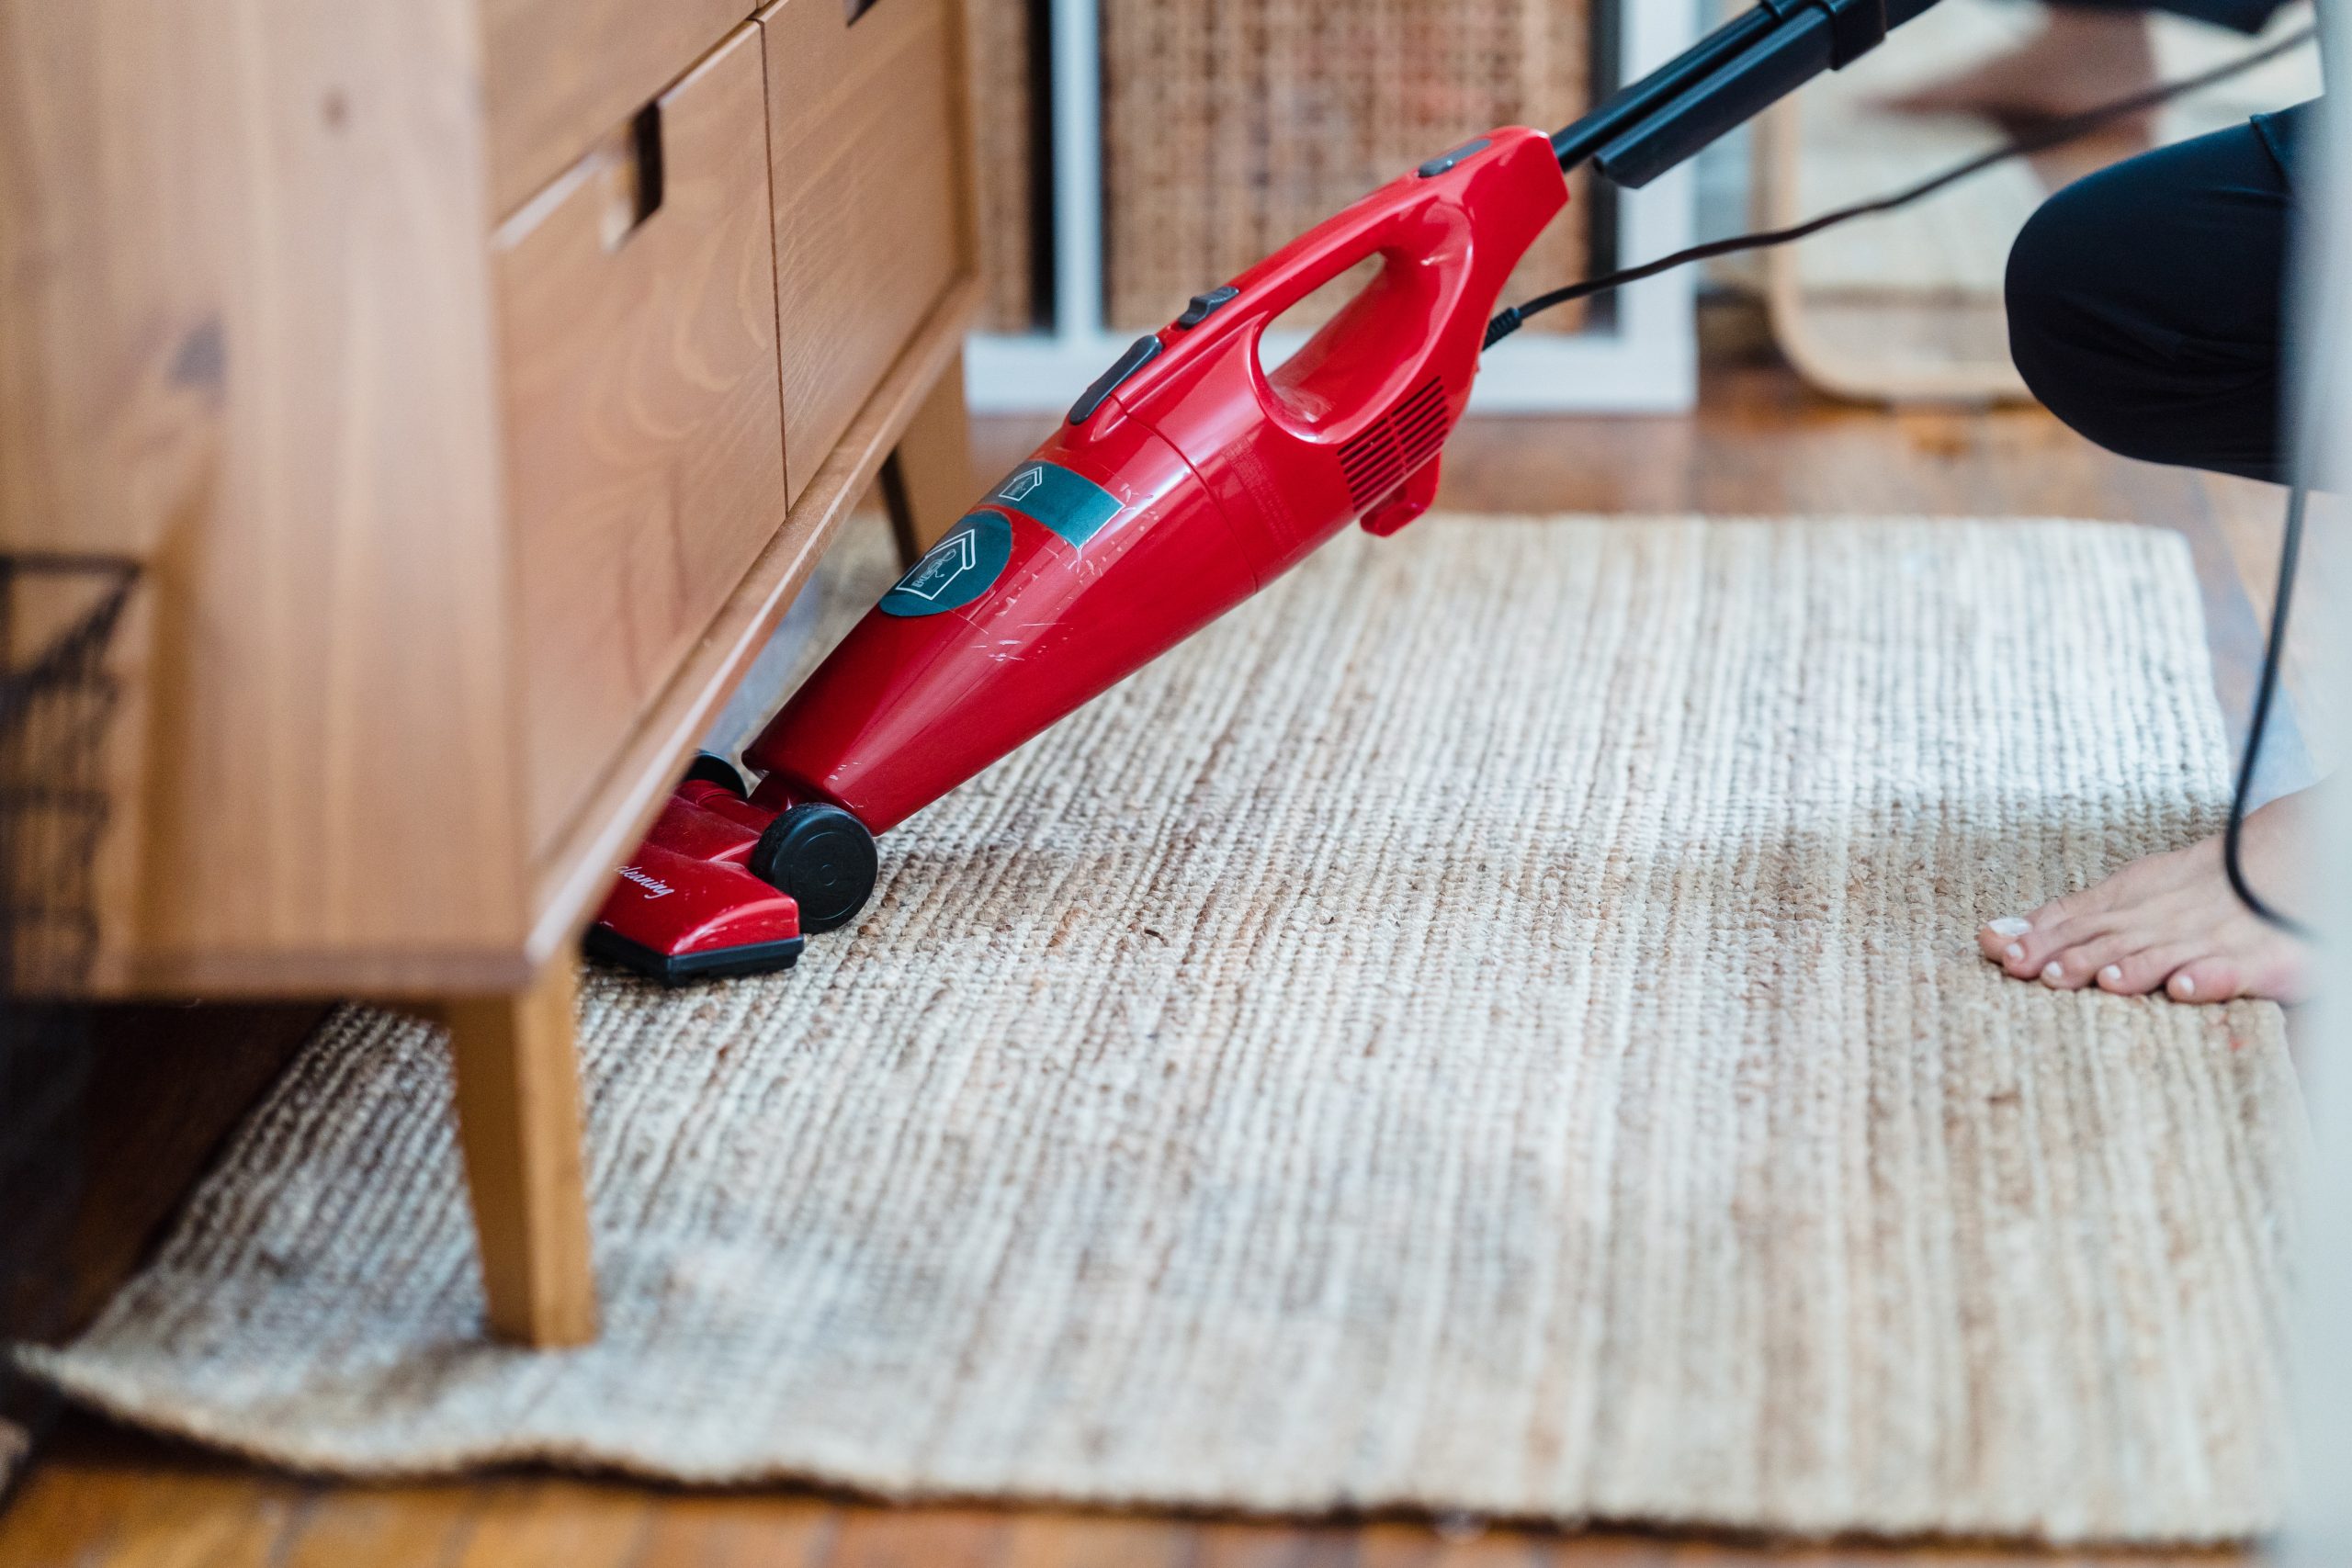 Vacuum cleaning the rug